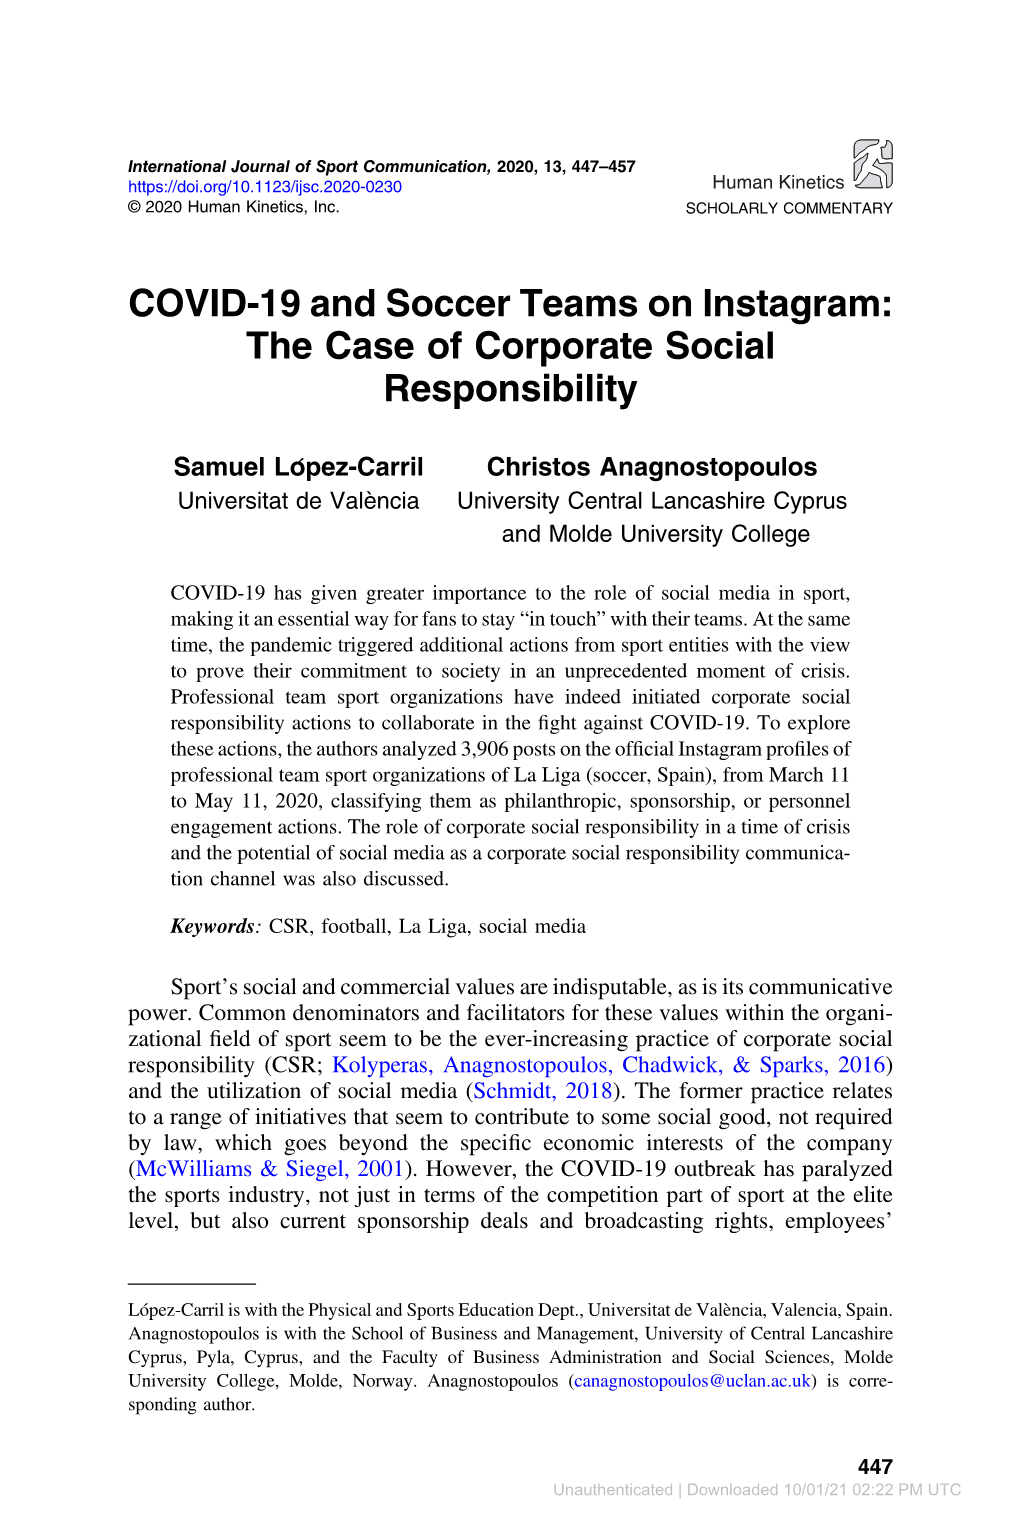 COVID-19 and Soccer Teams on Instagram: the Case of Corporate Social Responsibility